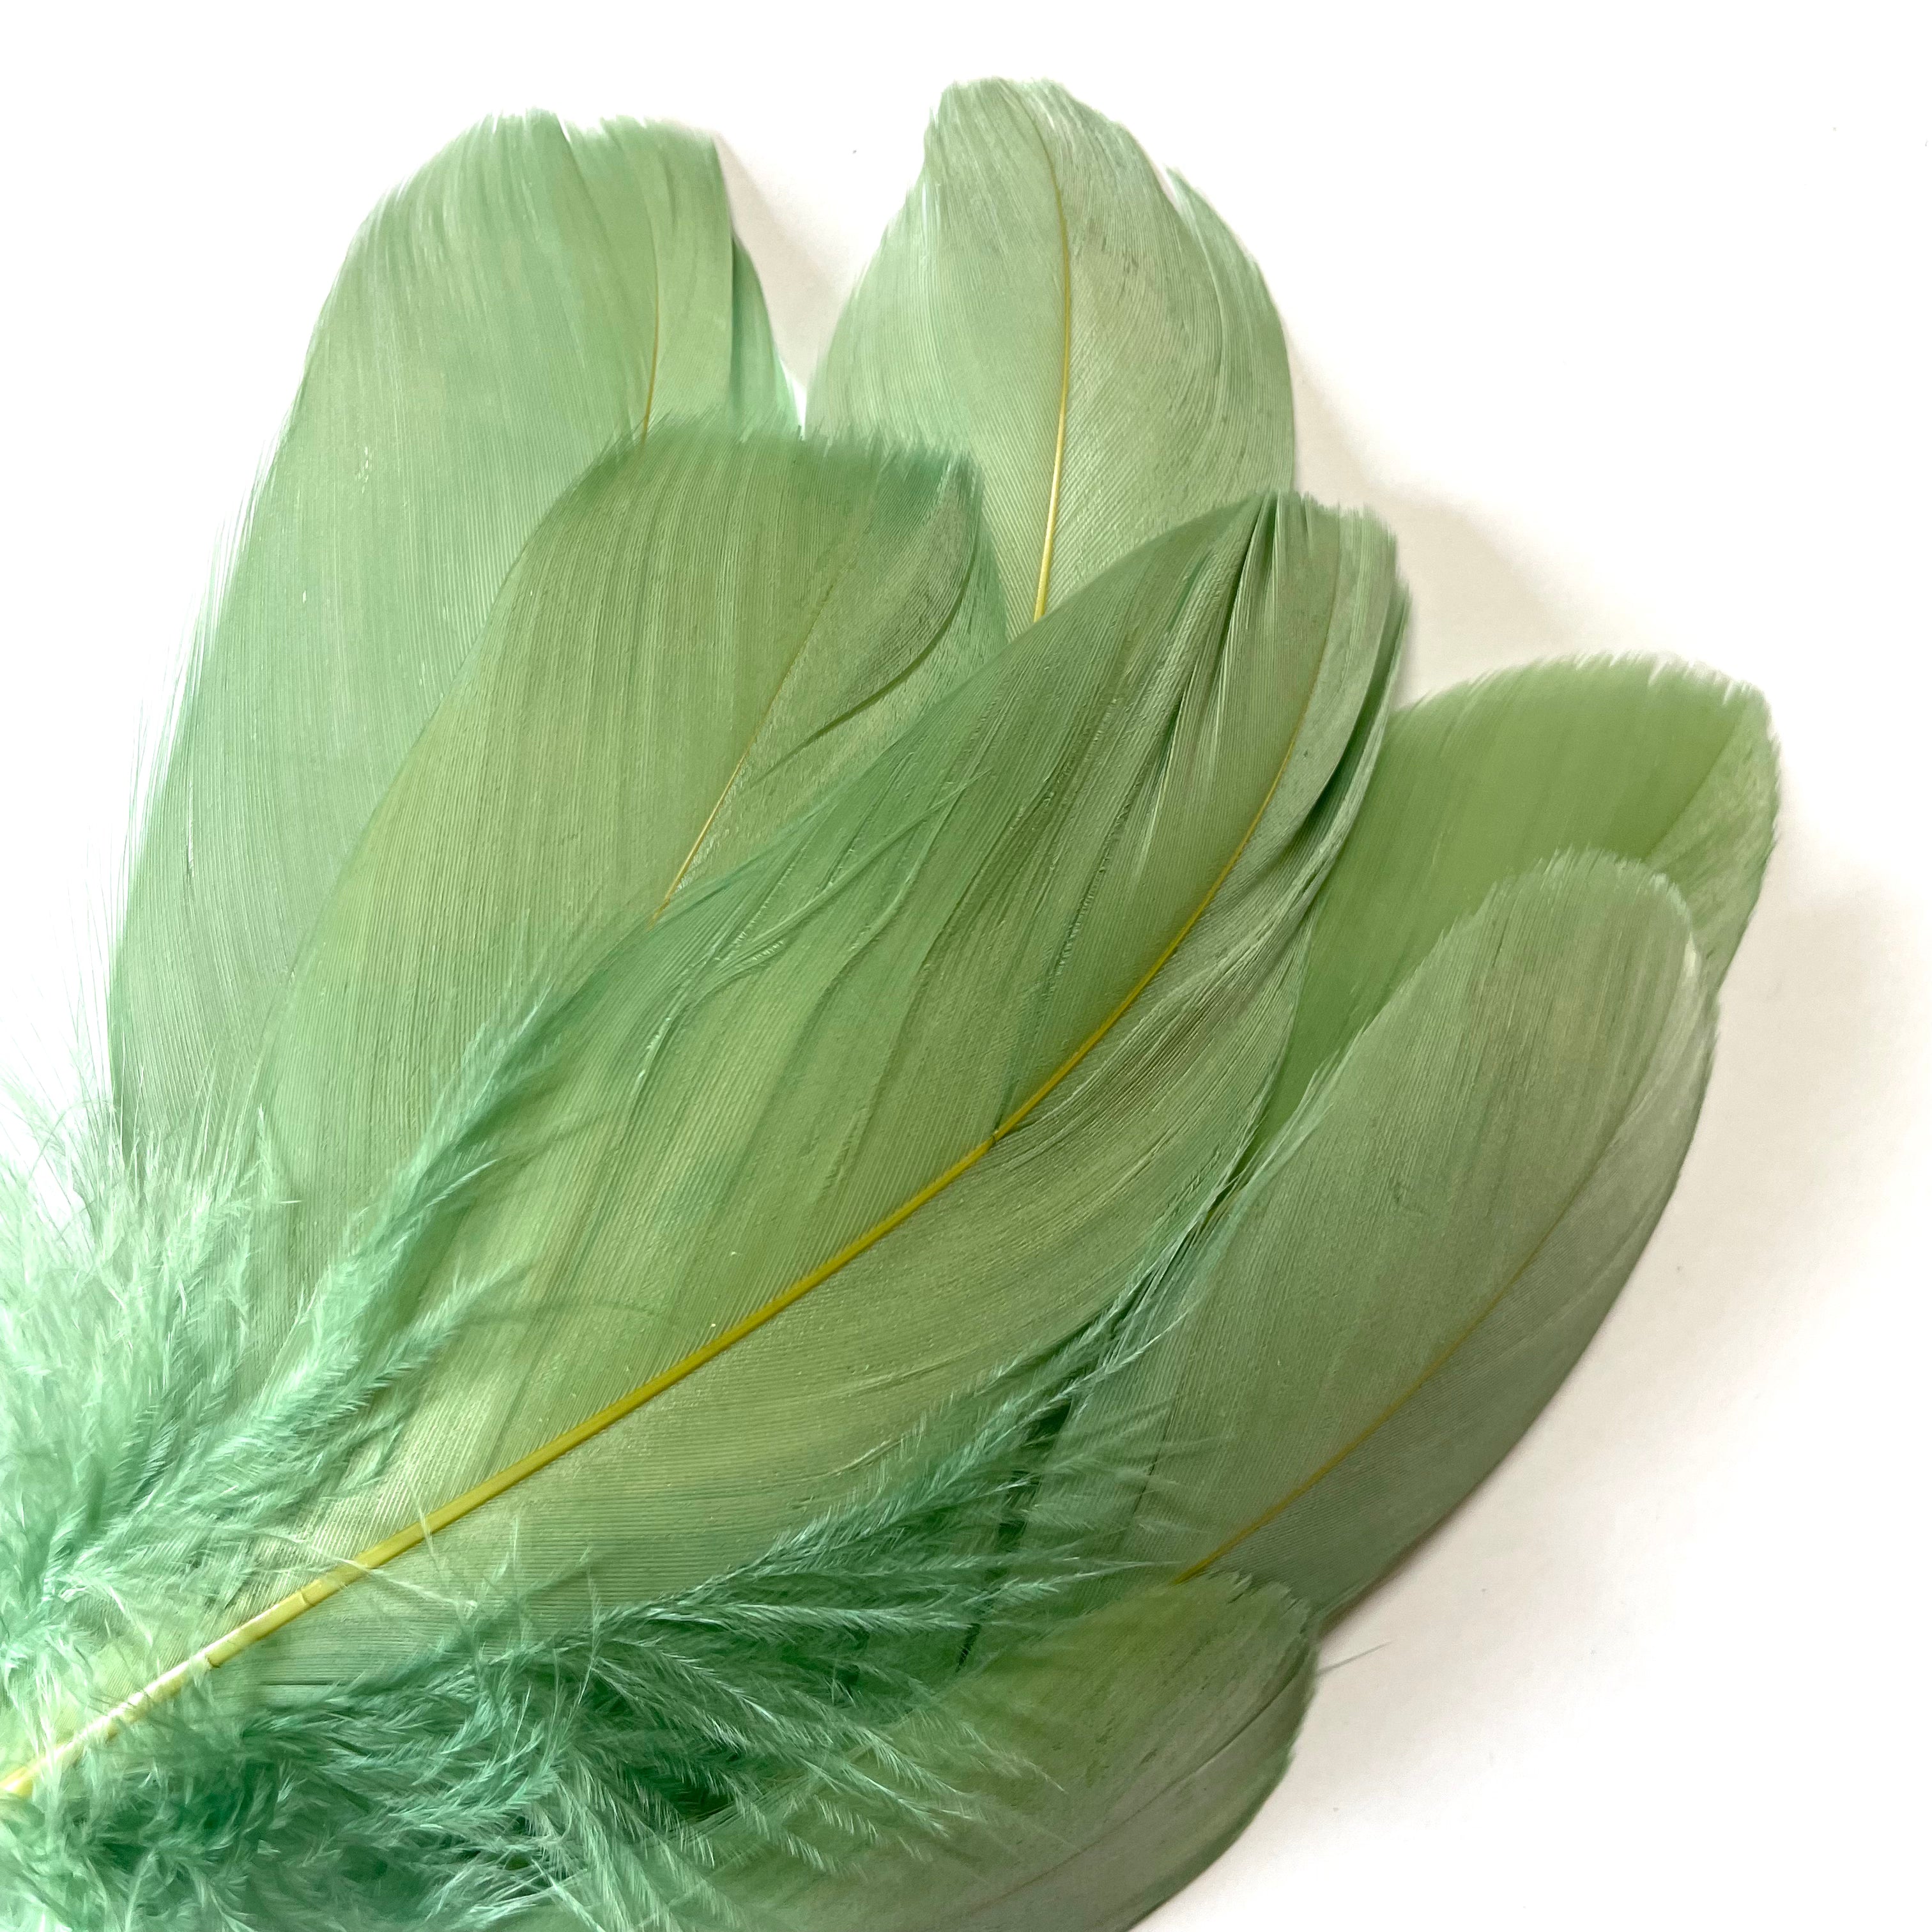 Goose Nagoire Feathers 10 grams - Sage